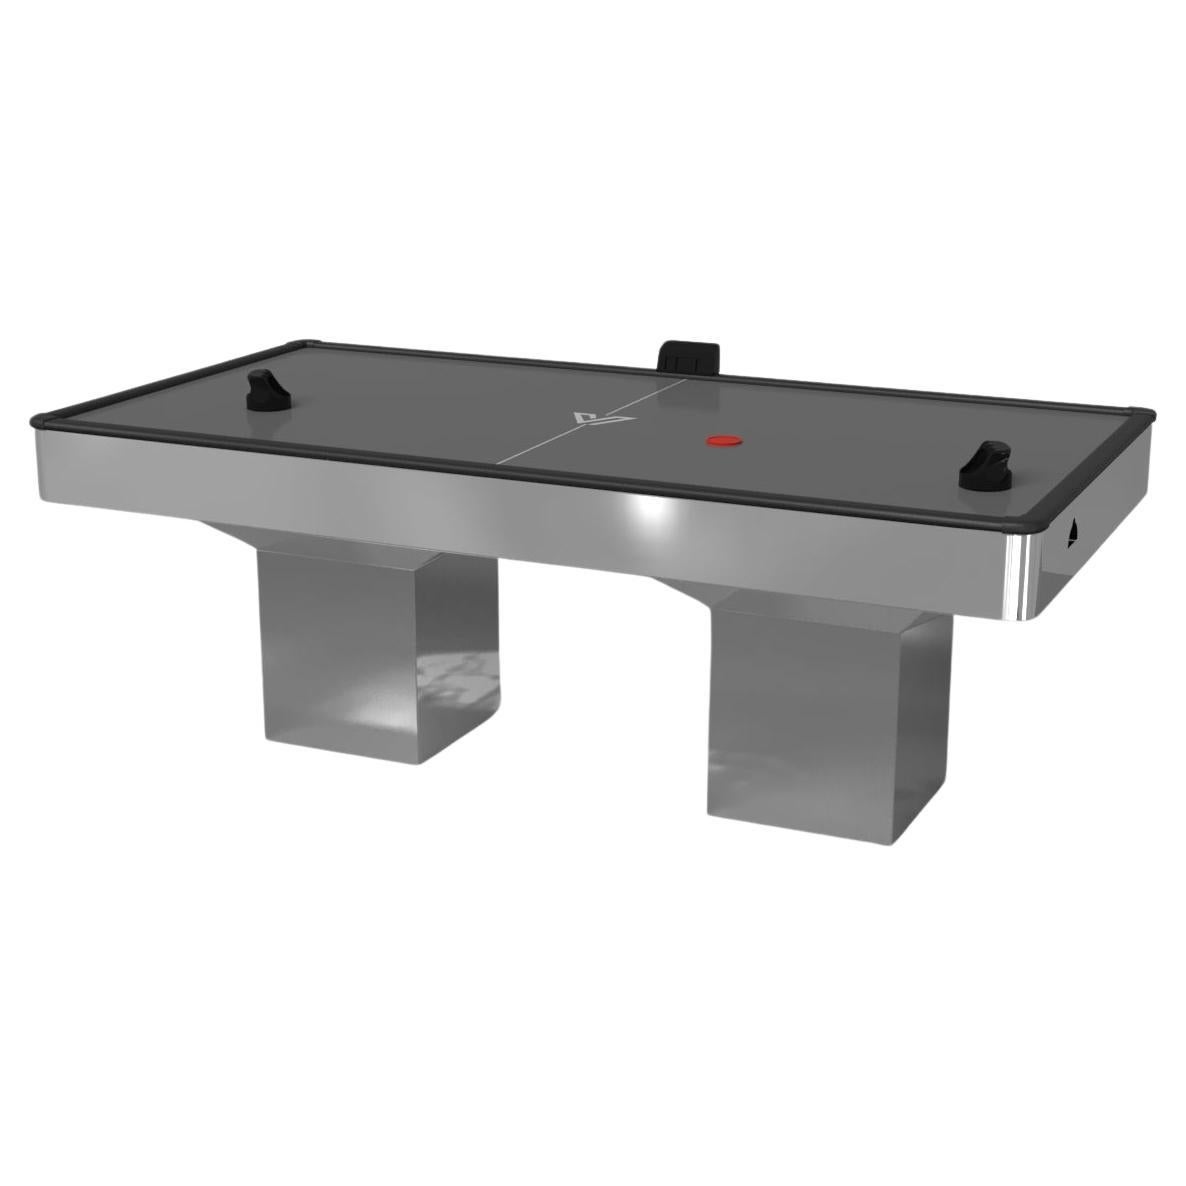 Elevate Customs Trestle Air Hockey Table/Stainless Steel Metal in 7'-Made in USA